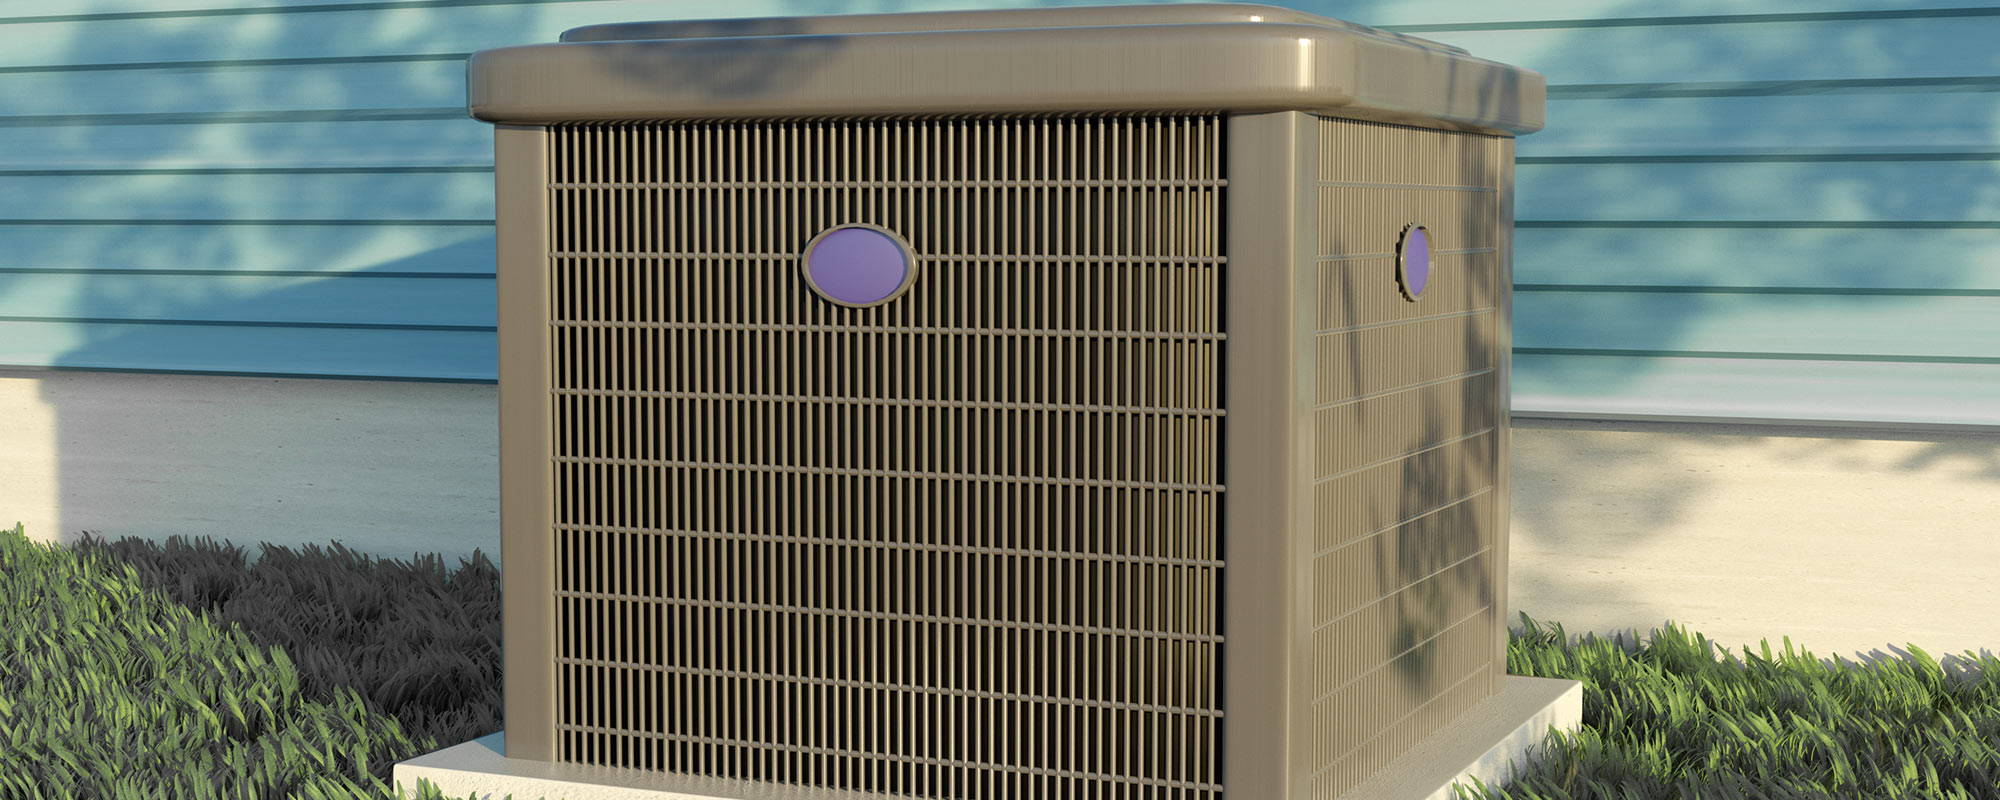 heat pump condenser outside of house with blue siding